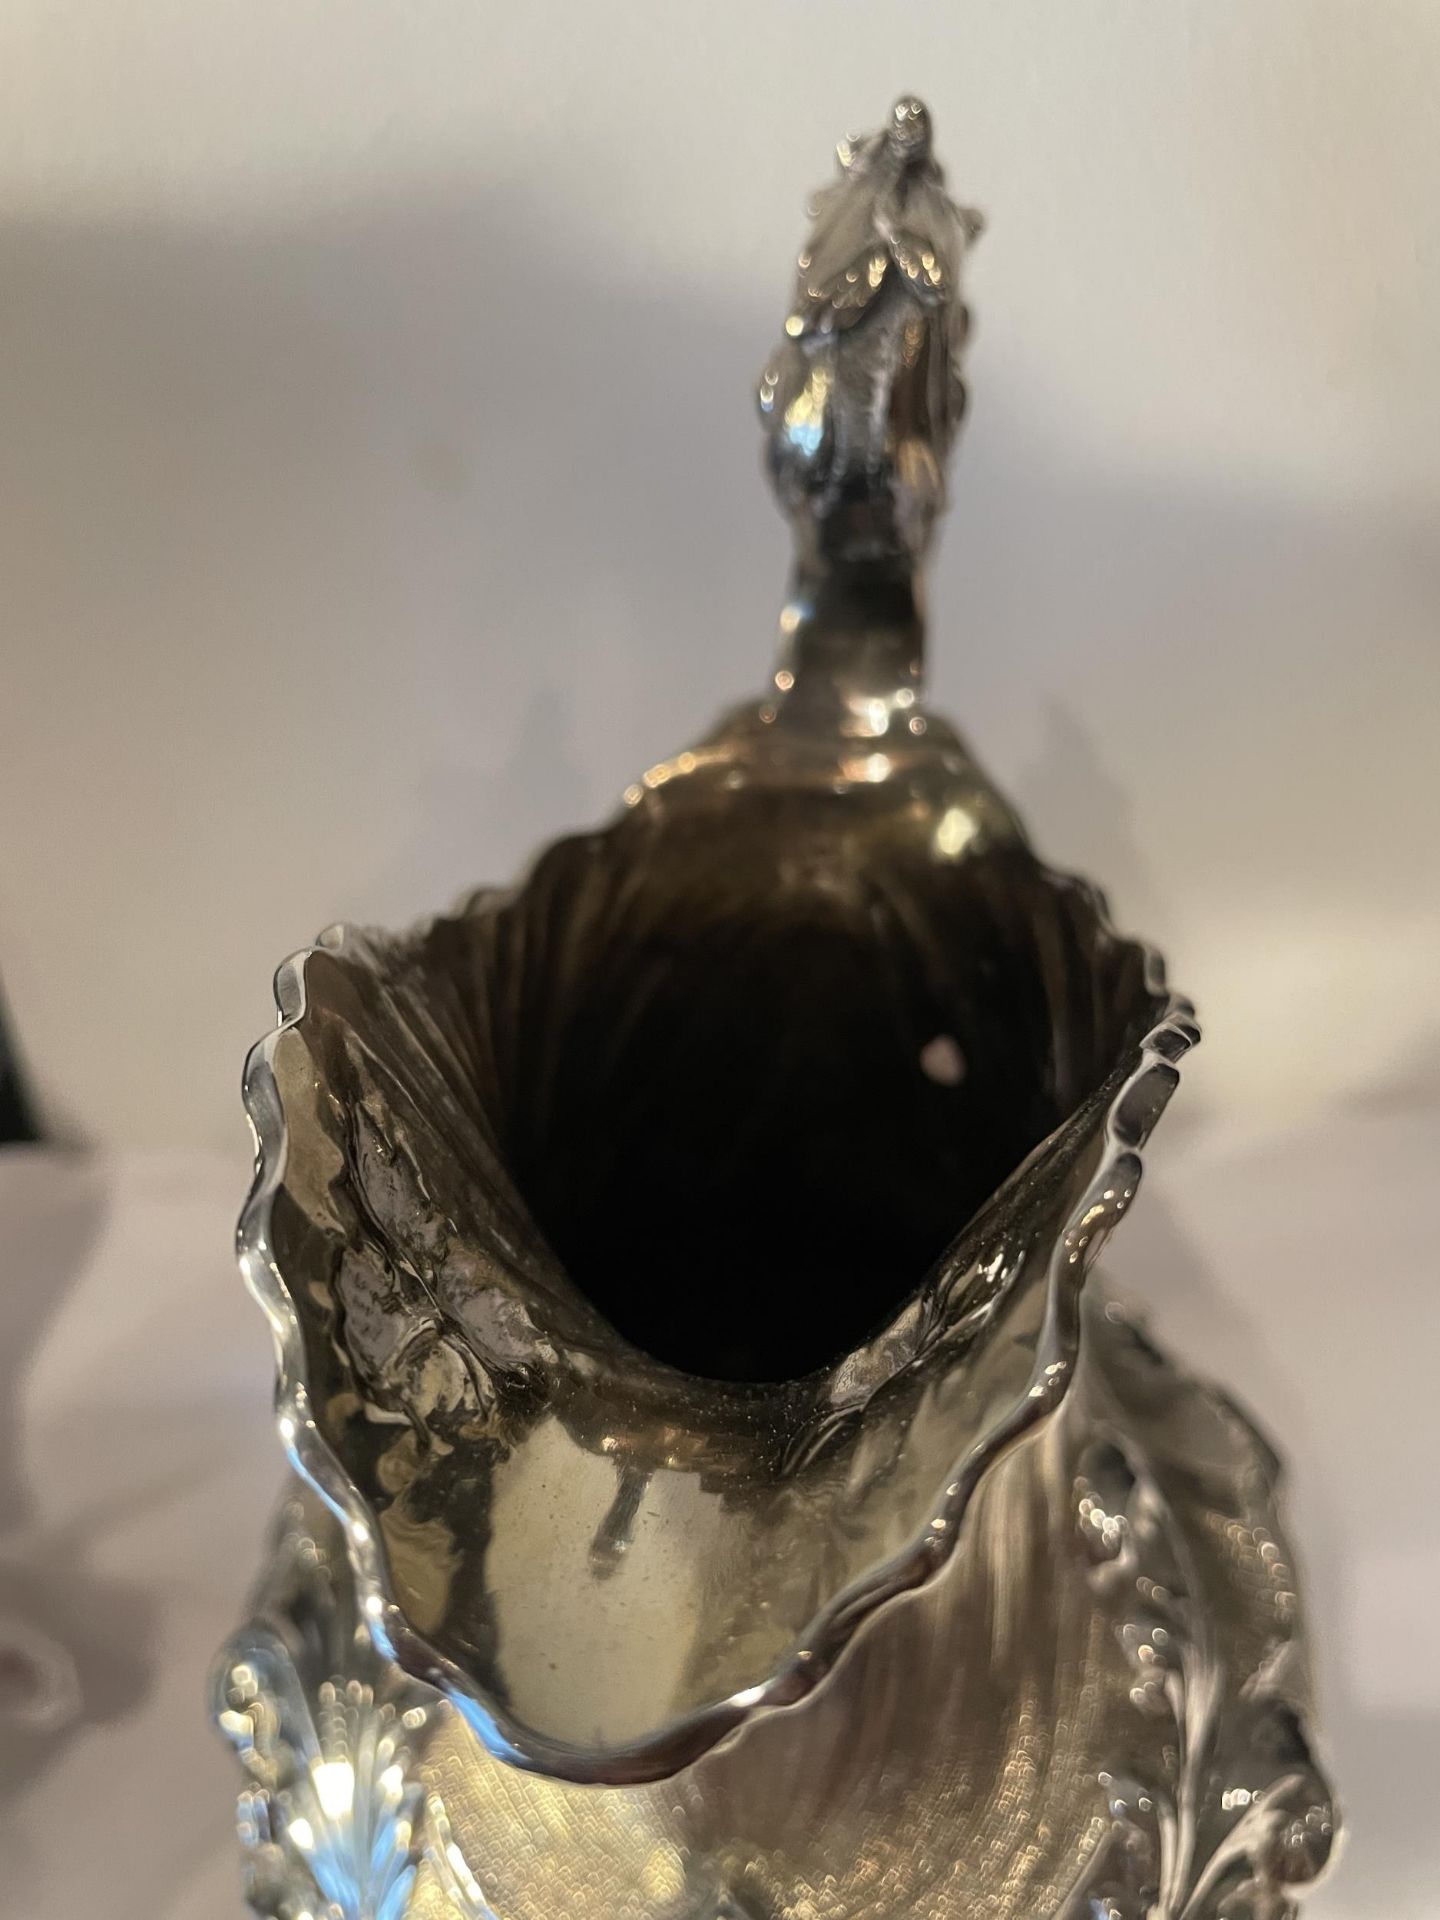 AN ORNATE 1830 HALLMARKED LONDON SILVER CLARET JUG, MAKER CHARLES FOX II GROSS WEIGHT 878 GRAMS - Image 11 of 18